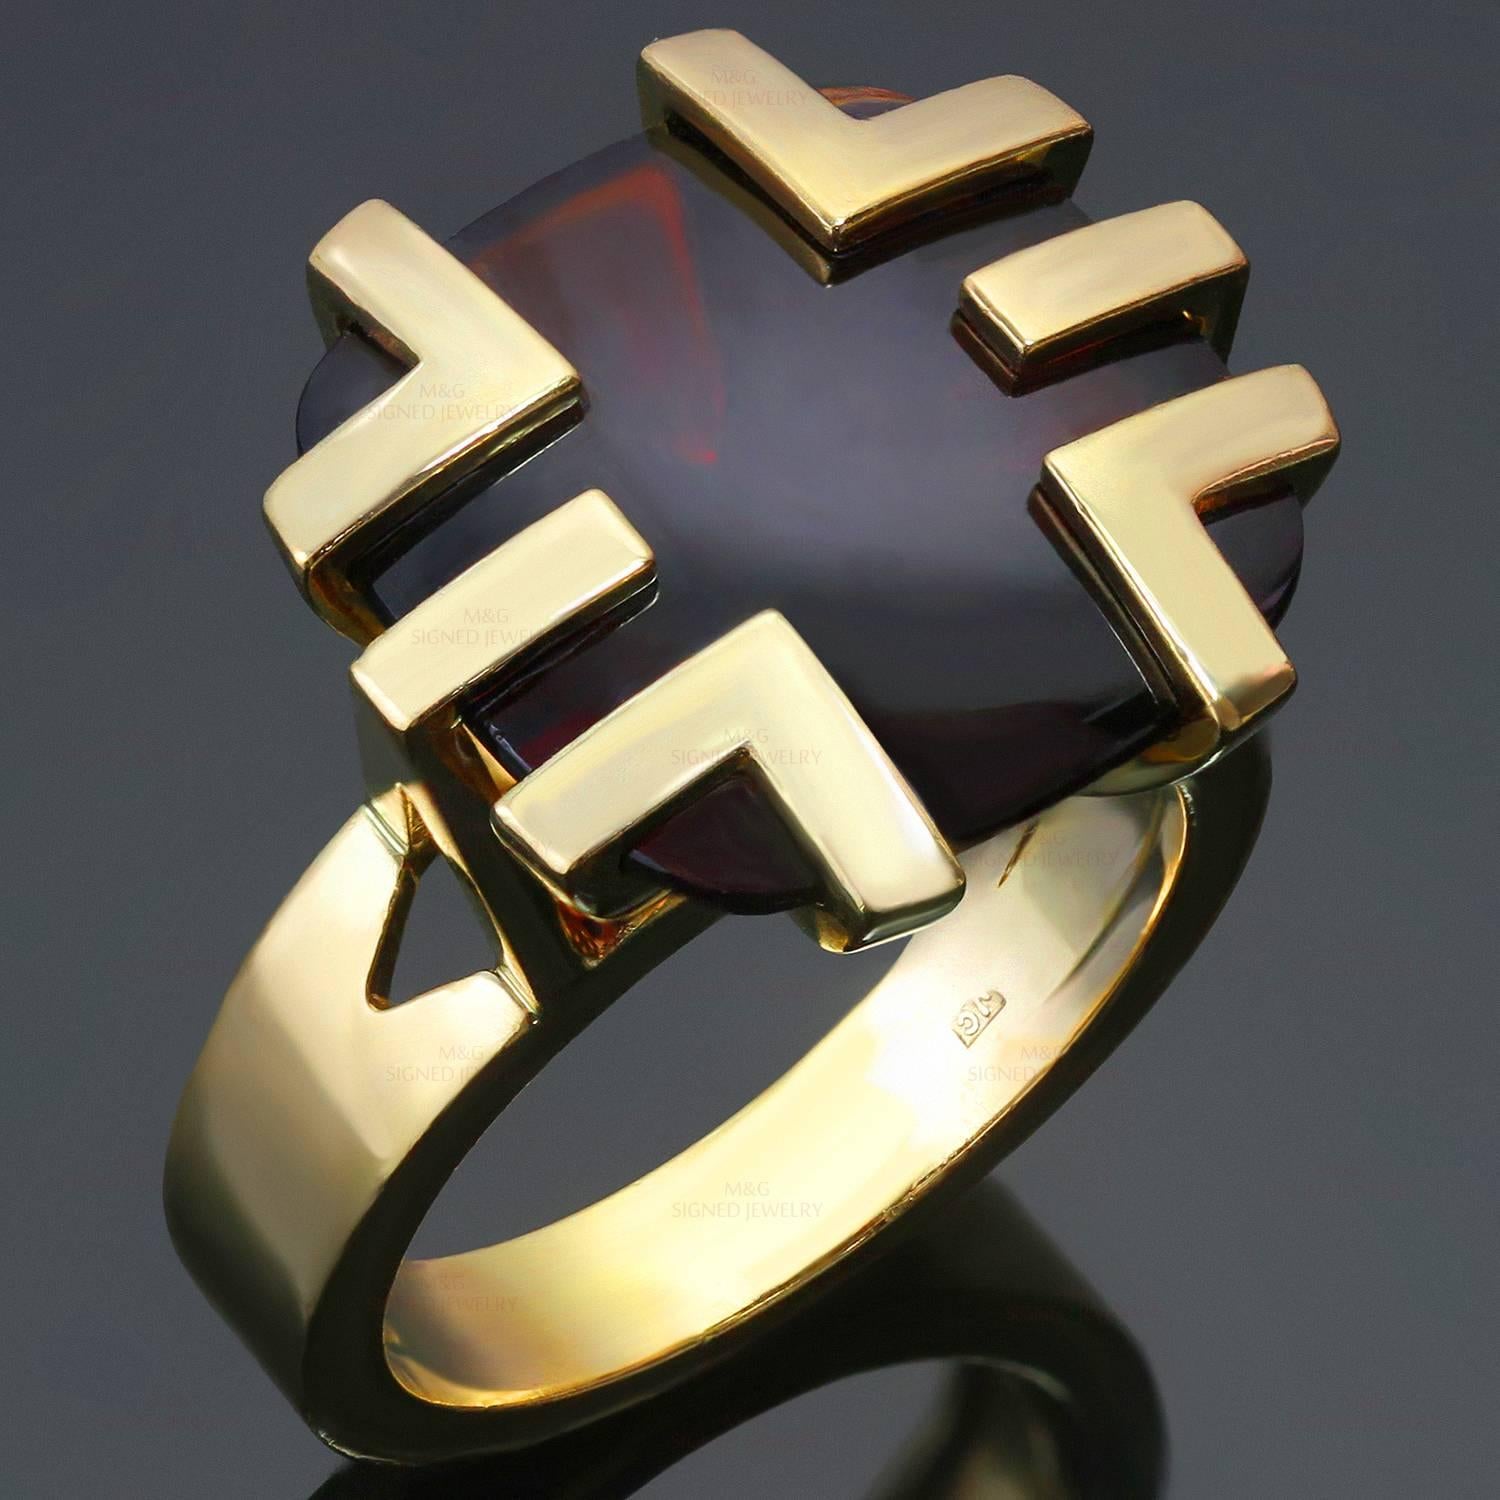 This gorgeous Cartier cocktail ring is crafted in 18k yellow gold and features a cabochon garnet set in a geometric crown. The 14.7mm x 14.9mm buff-top cushion-shaped garnet has dark red color with brownish tones, a fairly good transparency with